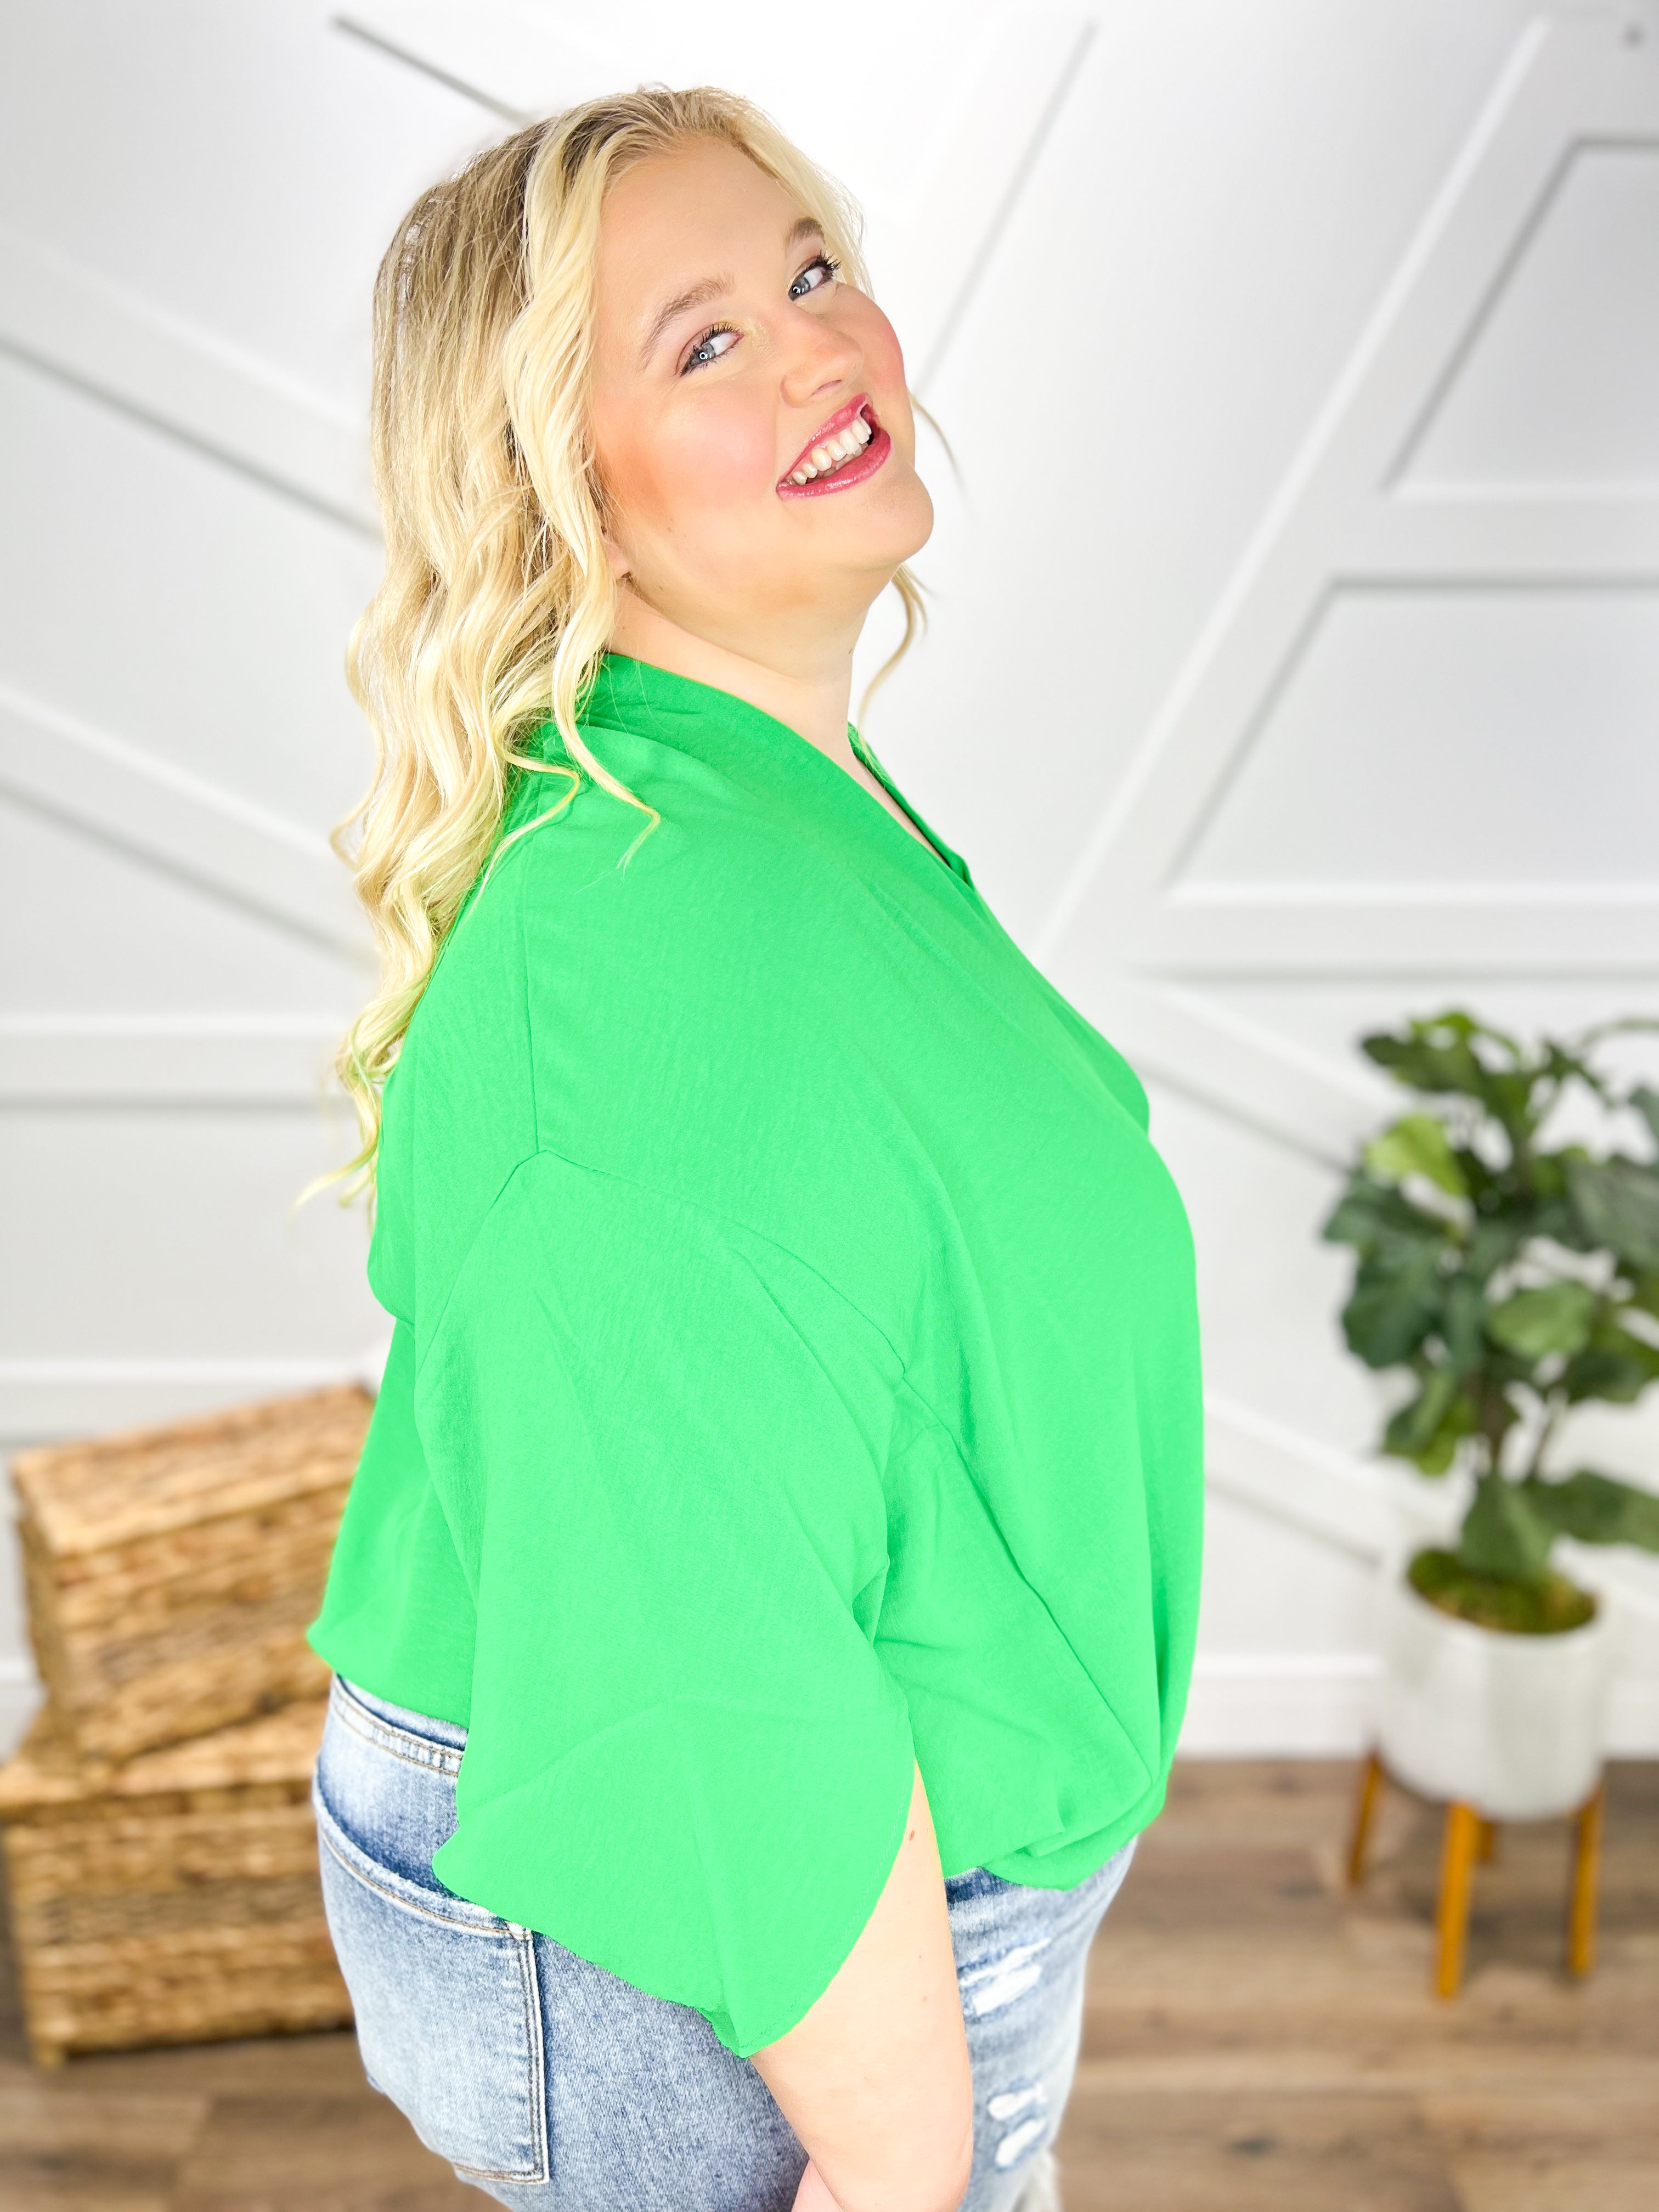 RESTOCK: All Business Top-110 Short Sleeve Top-First Love-Heathered Boho Boutique, Women's Fashion and Accessories in Palmetto, FL